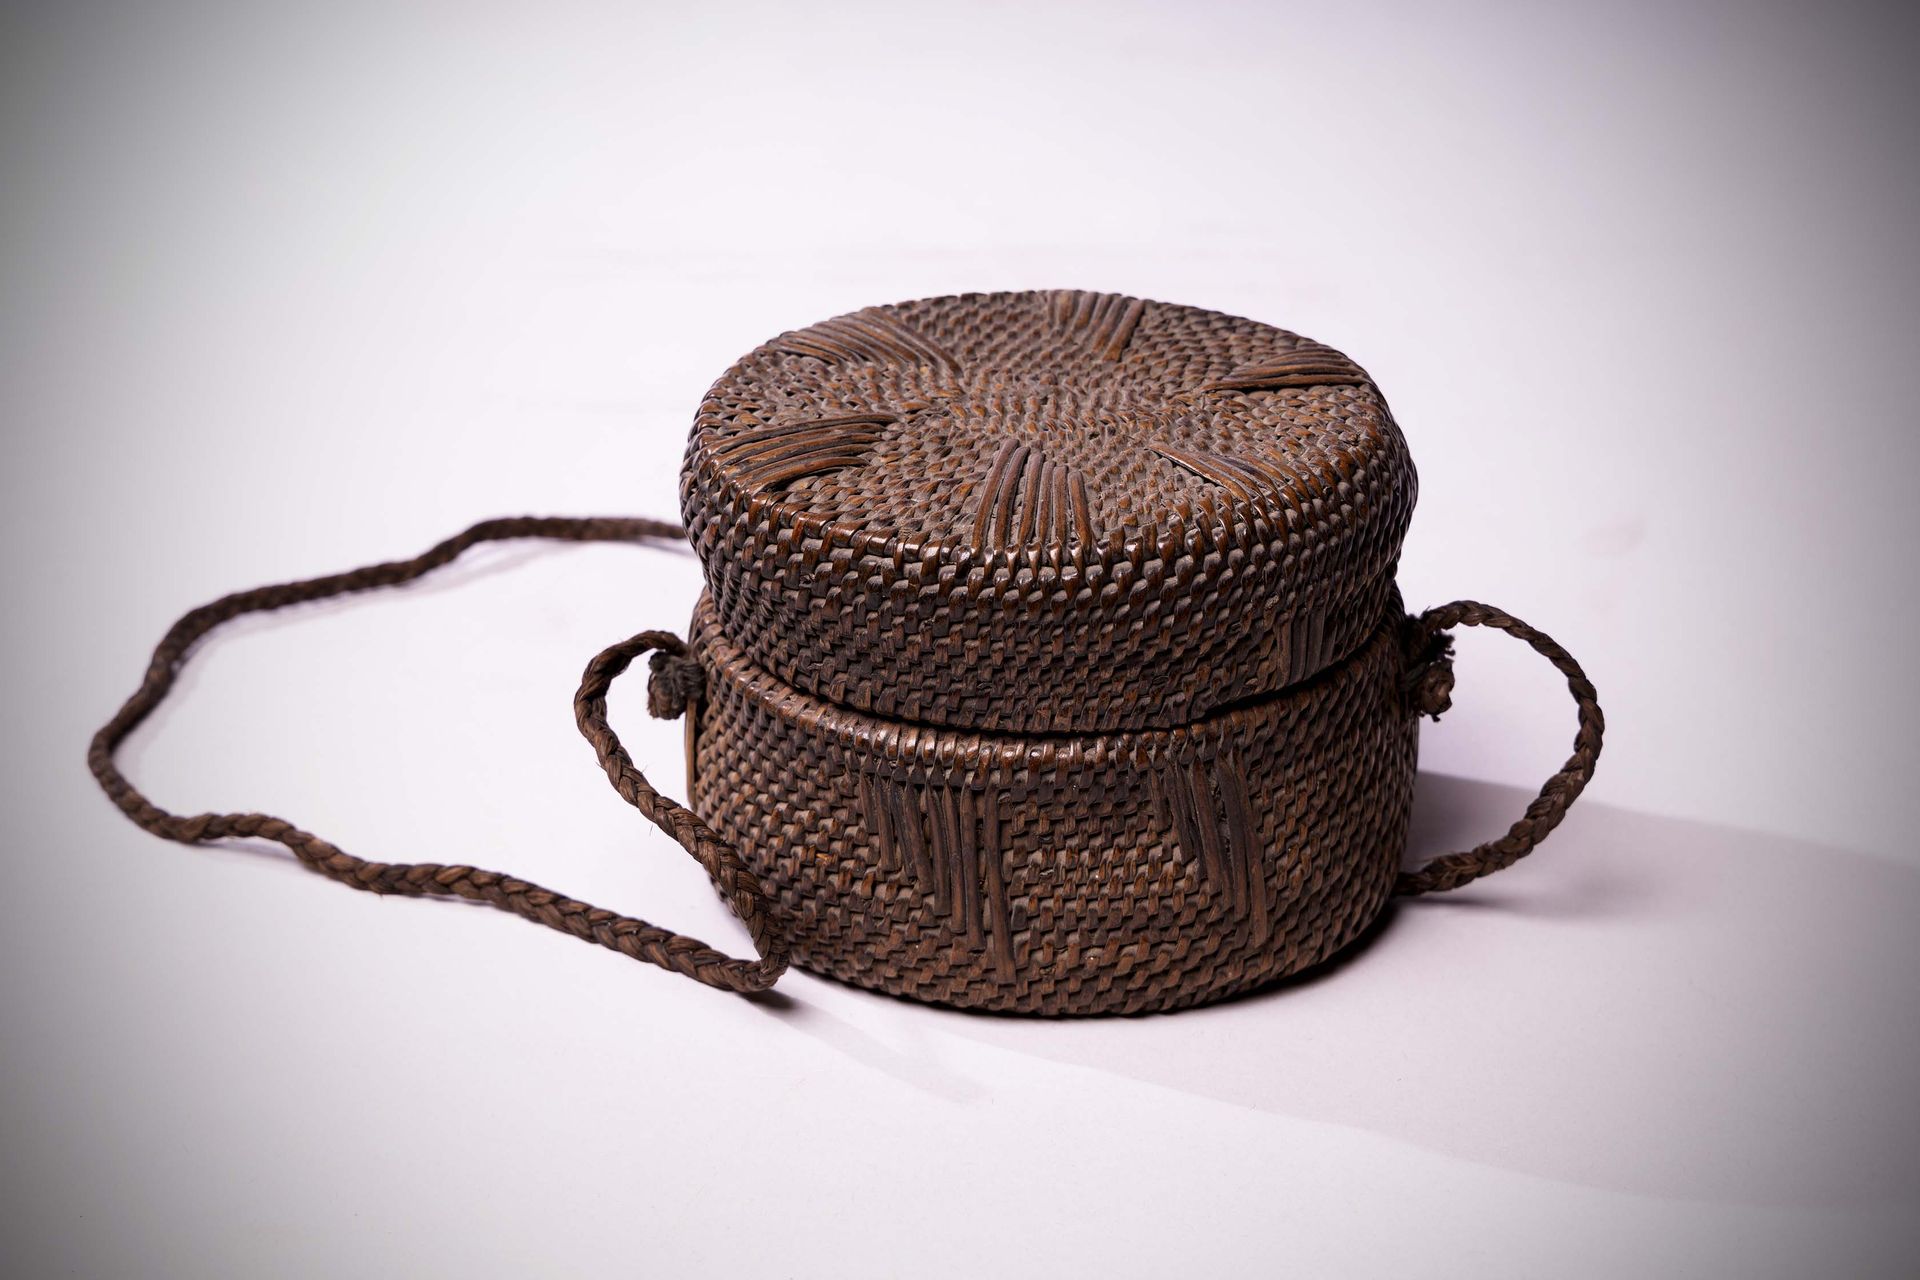 Null Yombé/

Vili

(DRC) This very finely executed basketry box contains a cradl&hellip;